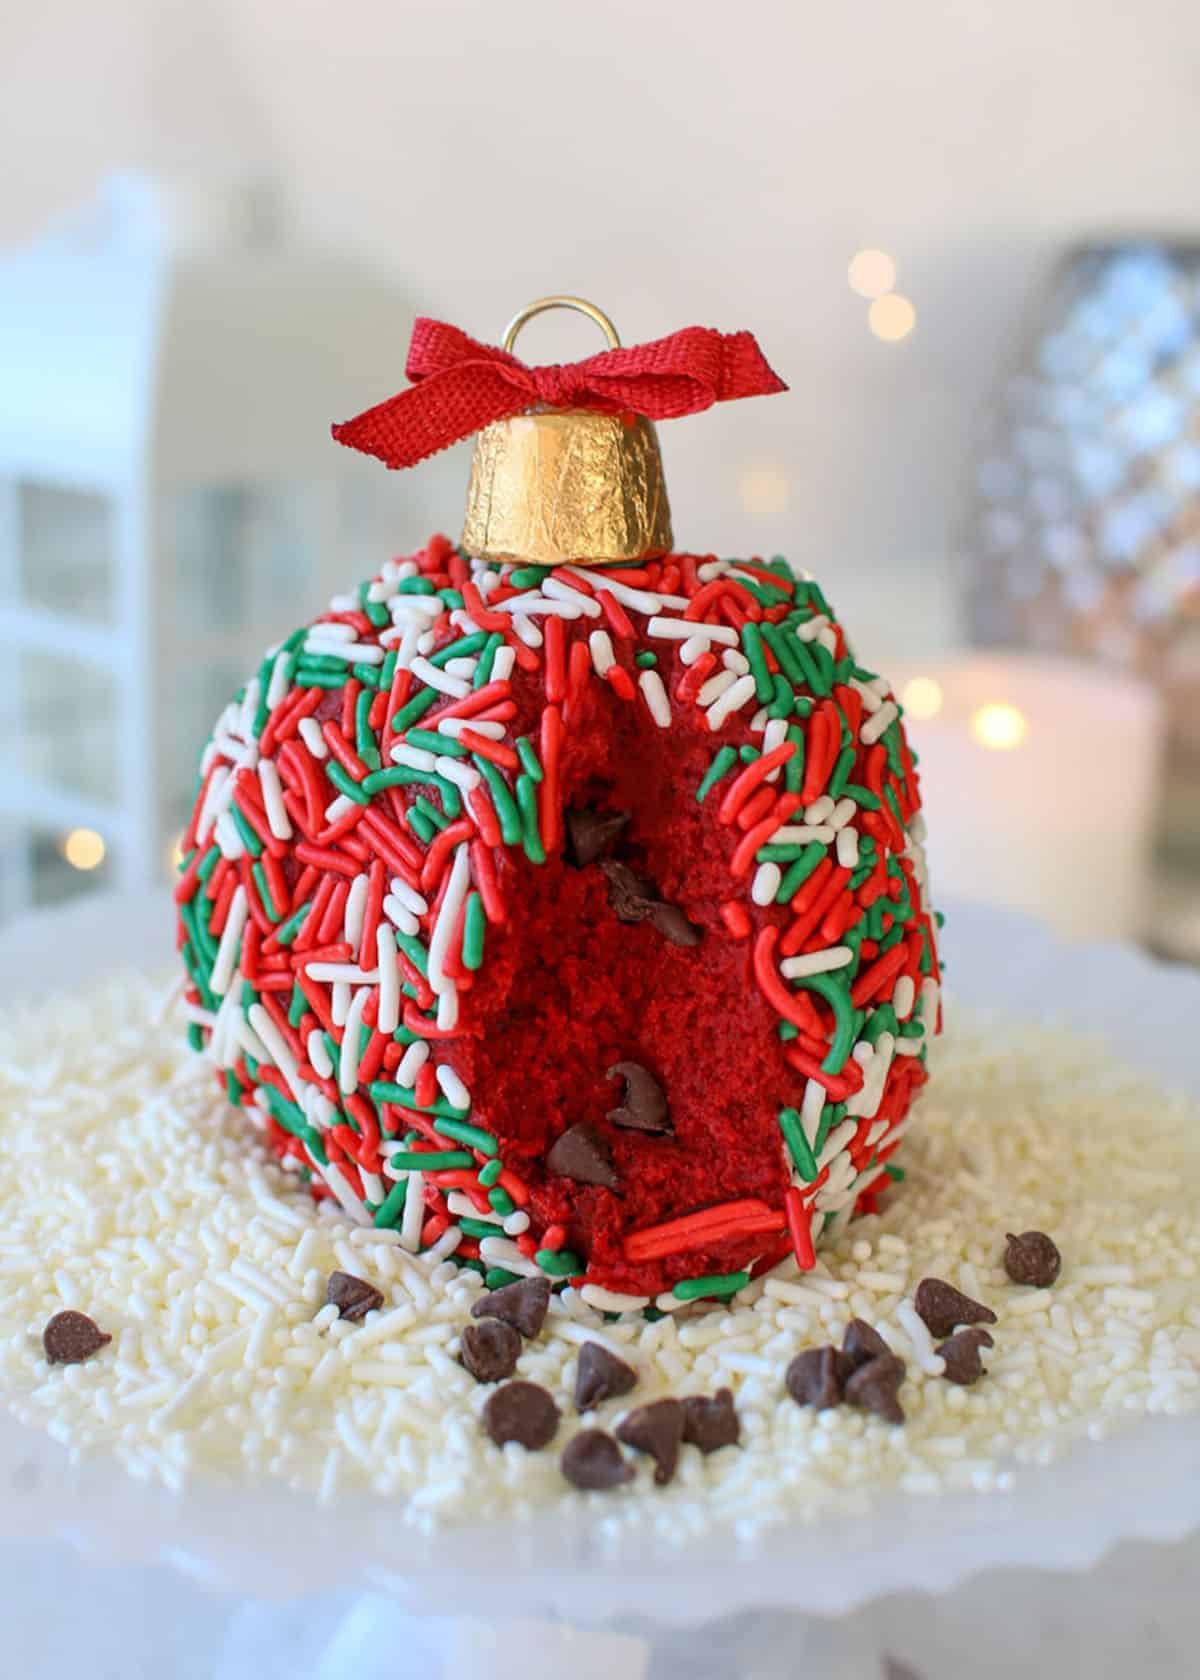 Christmas Ornament Red Velvet Cheese Balls cut into with mini chocolate chips following out, on a bed of white jimmy sprinkles with white, silver and fairy lights in the background